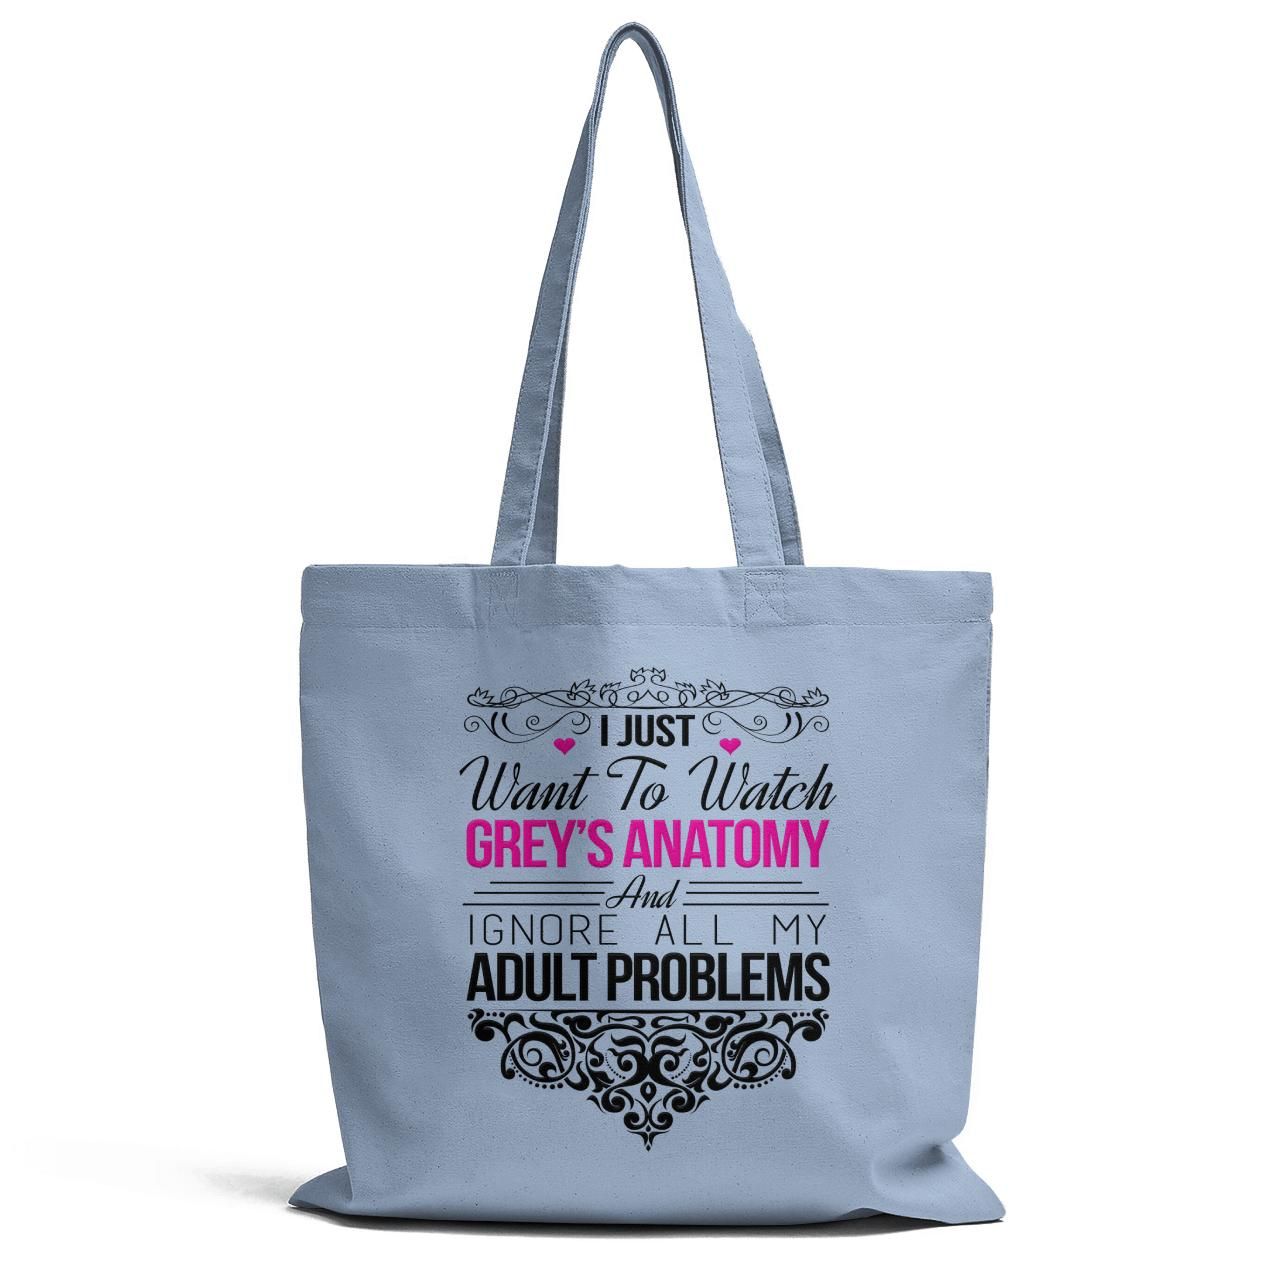 Ignore All My Adult Problems Tote Bag